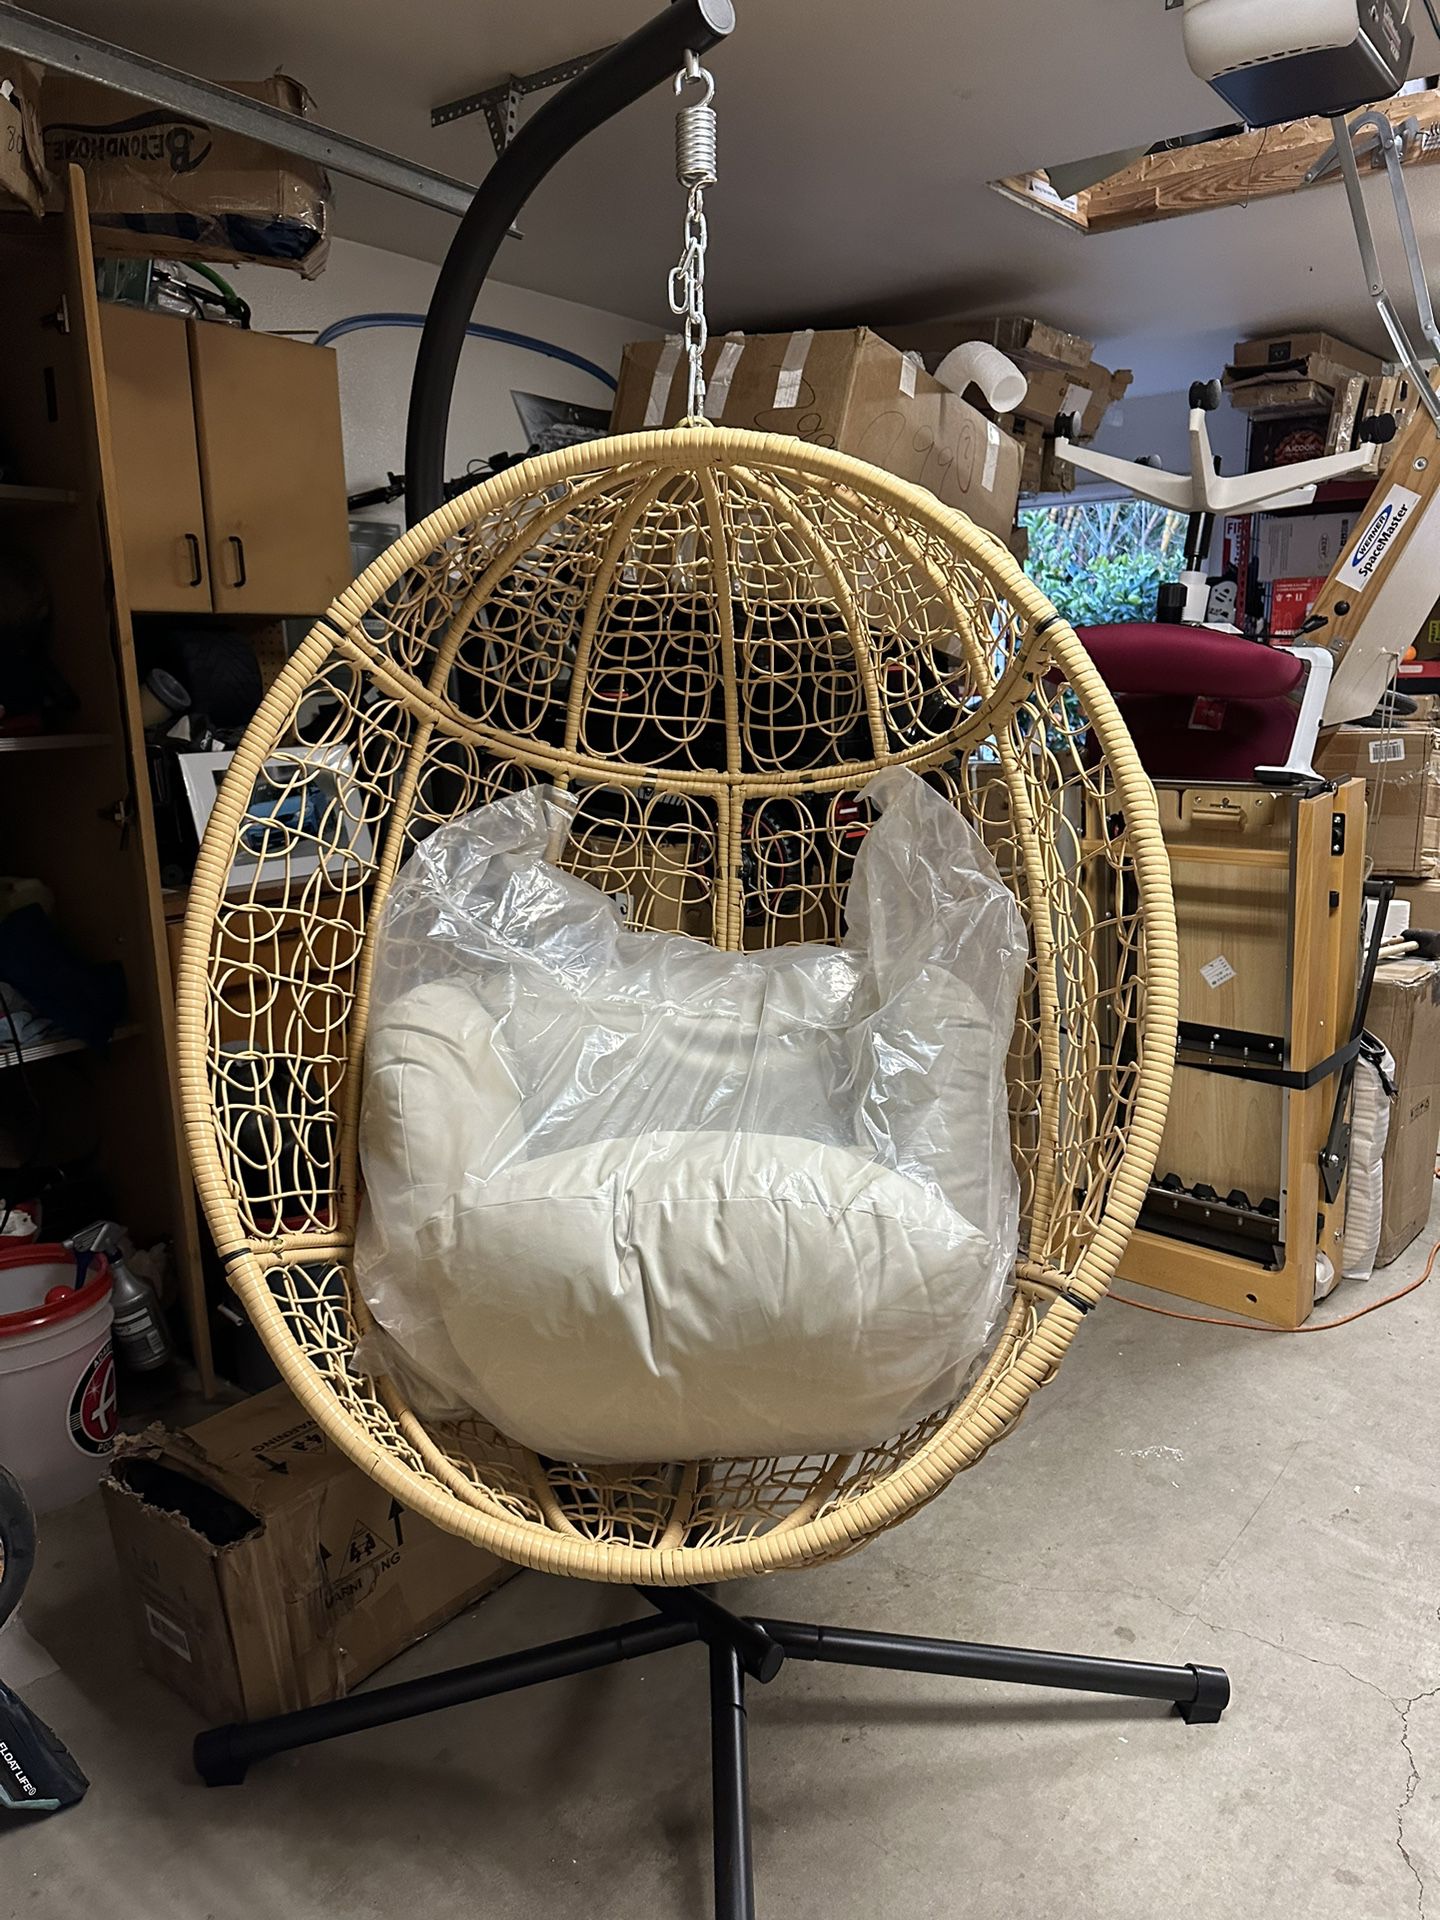 Wicker Hanging Egg Chair With Stand